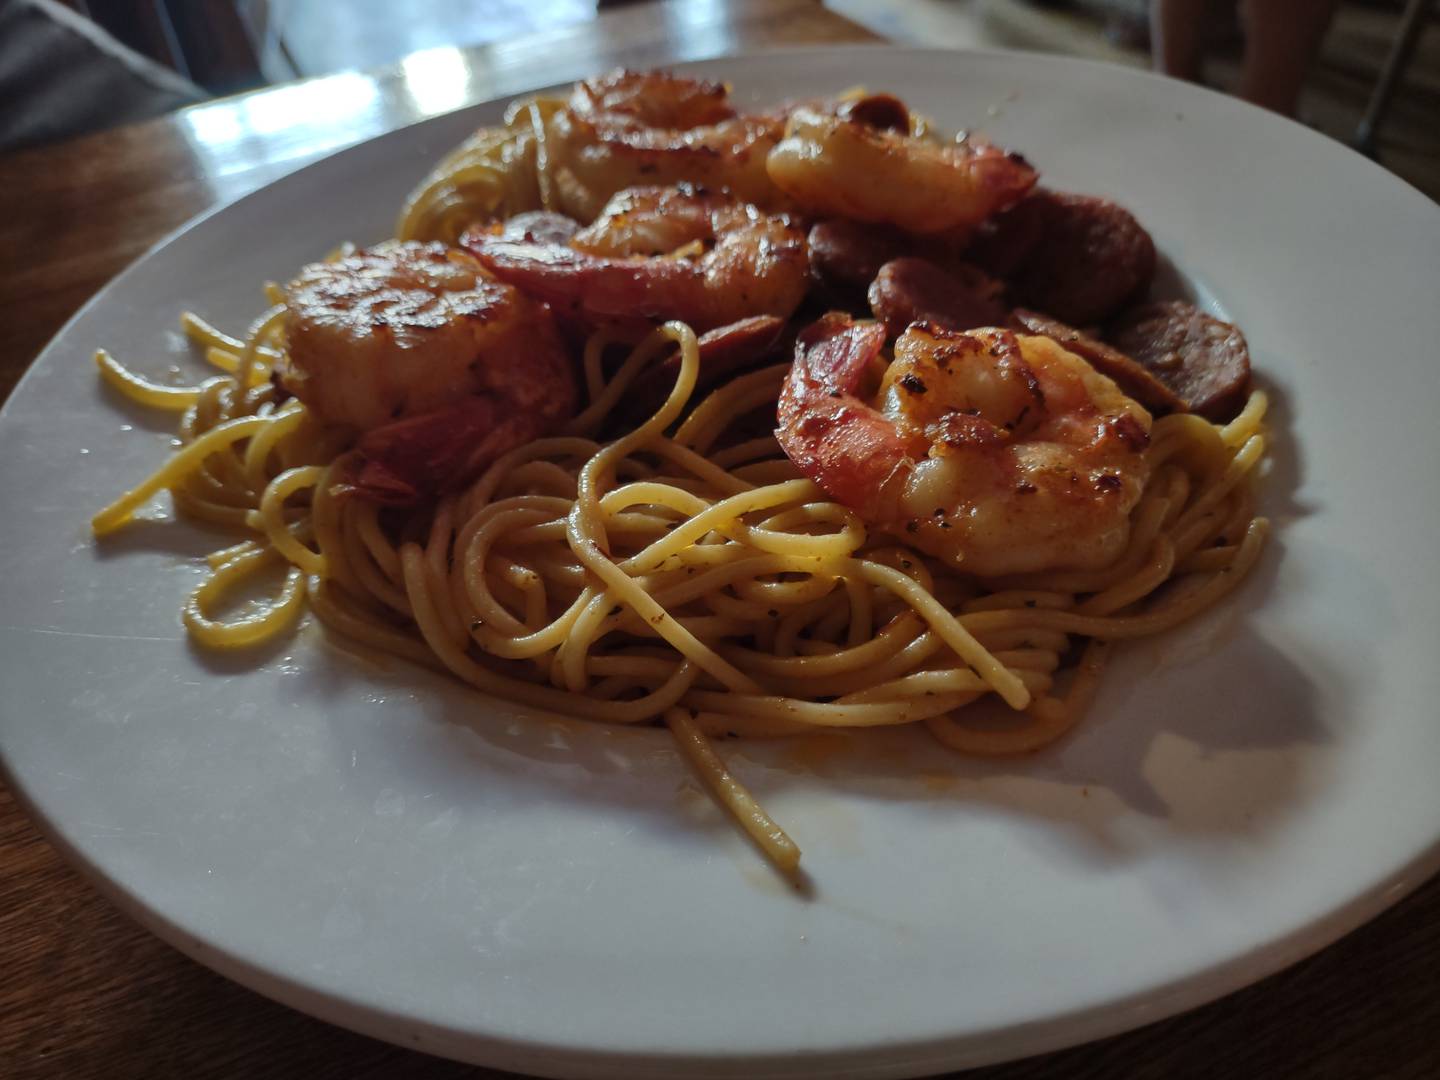 Jumbo shrimps top the andouille and shrimp scampi pasta dish at Canal Port in Utica.